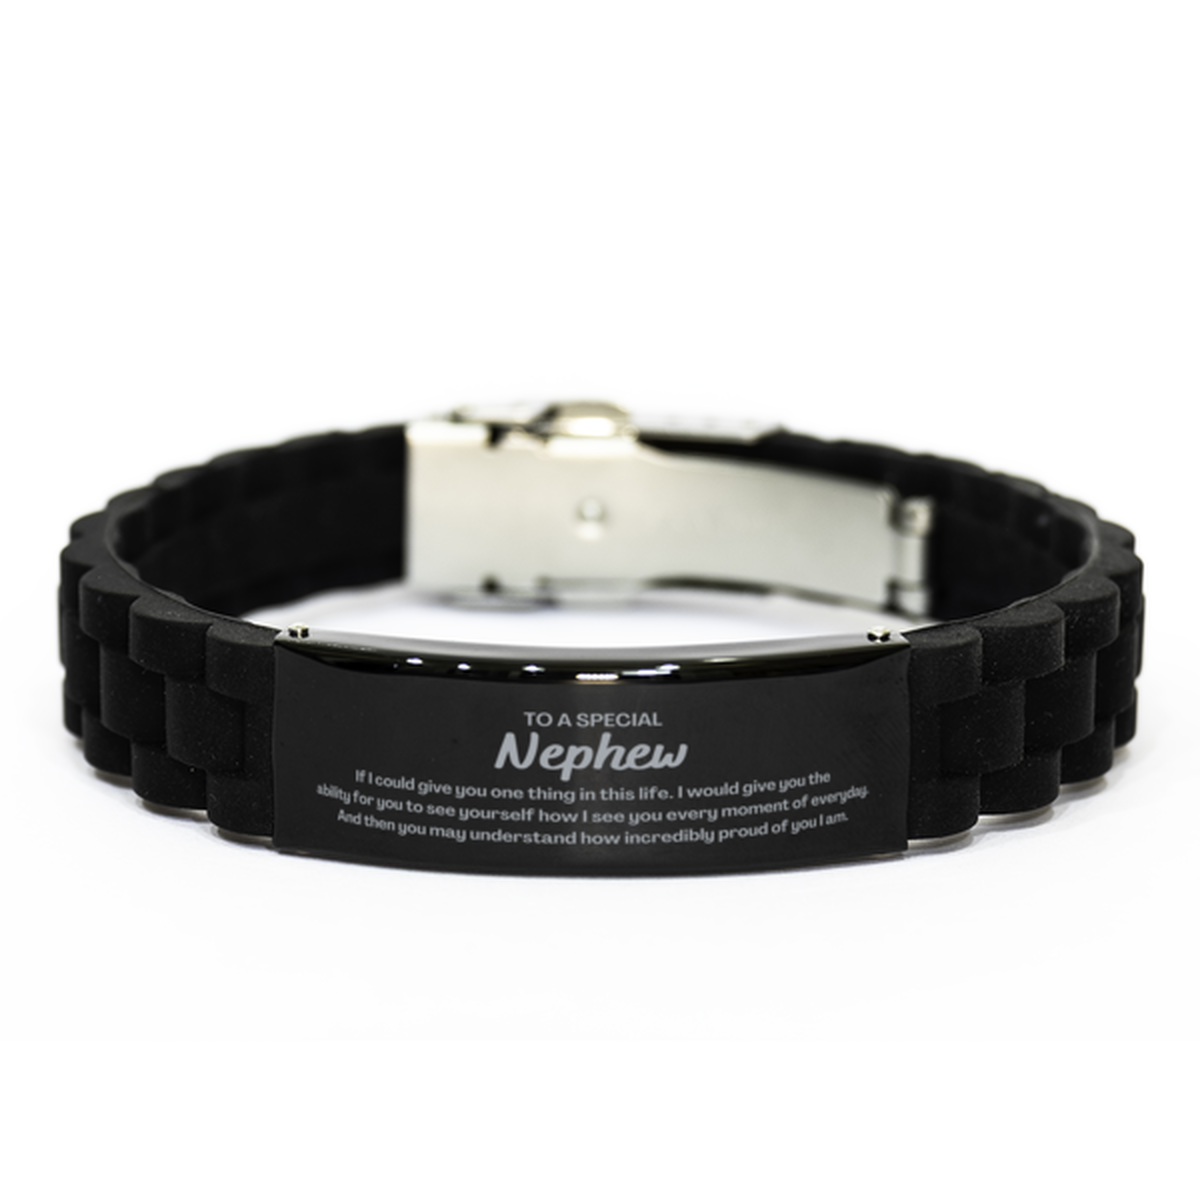 To My Nephew Black Glidelock Clasp Bracelet, Gifts For Nephew Engraved, Inspirational Gifts for Christmas Birthday, Epic Gifts for Nephew To A Special Nephew how incredibly proud of you I am